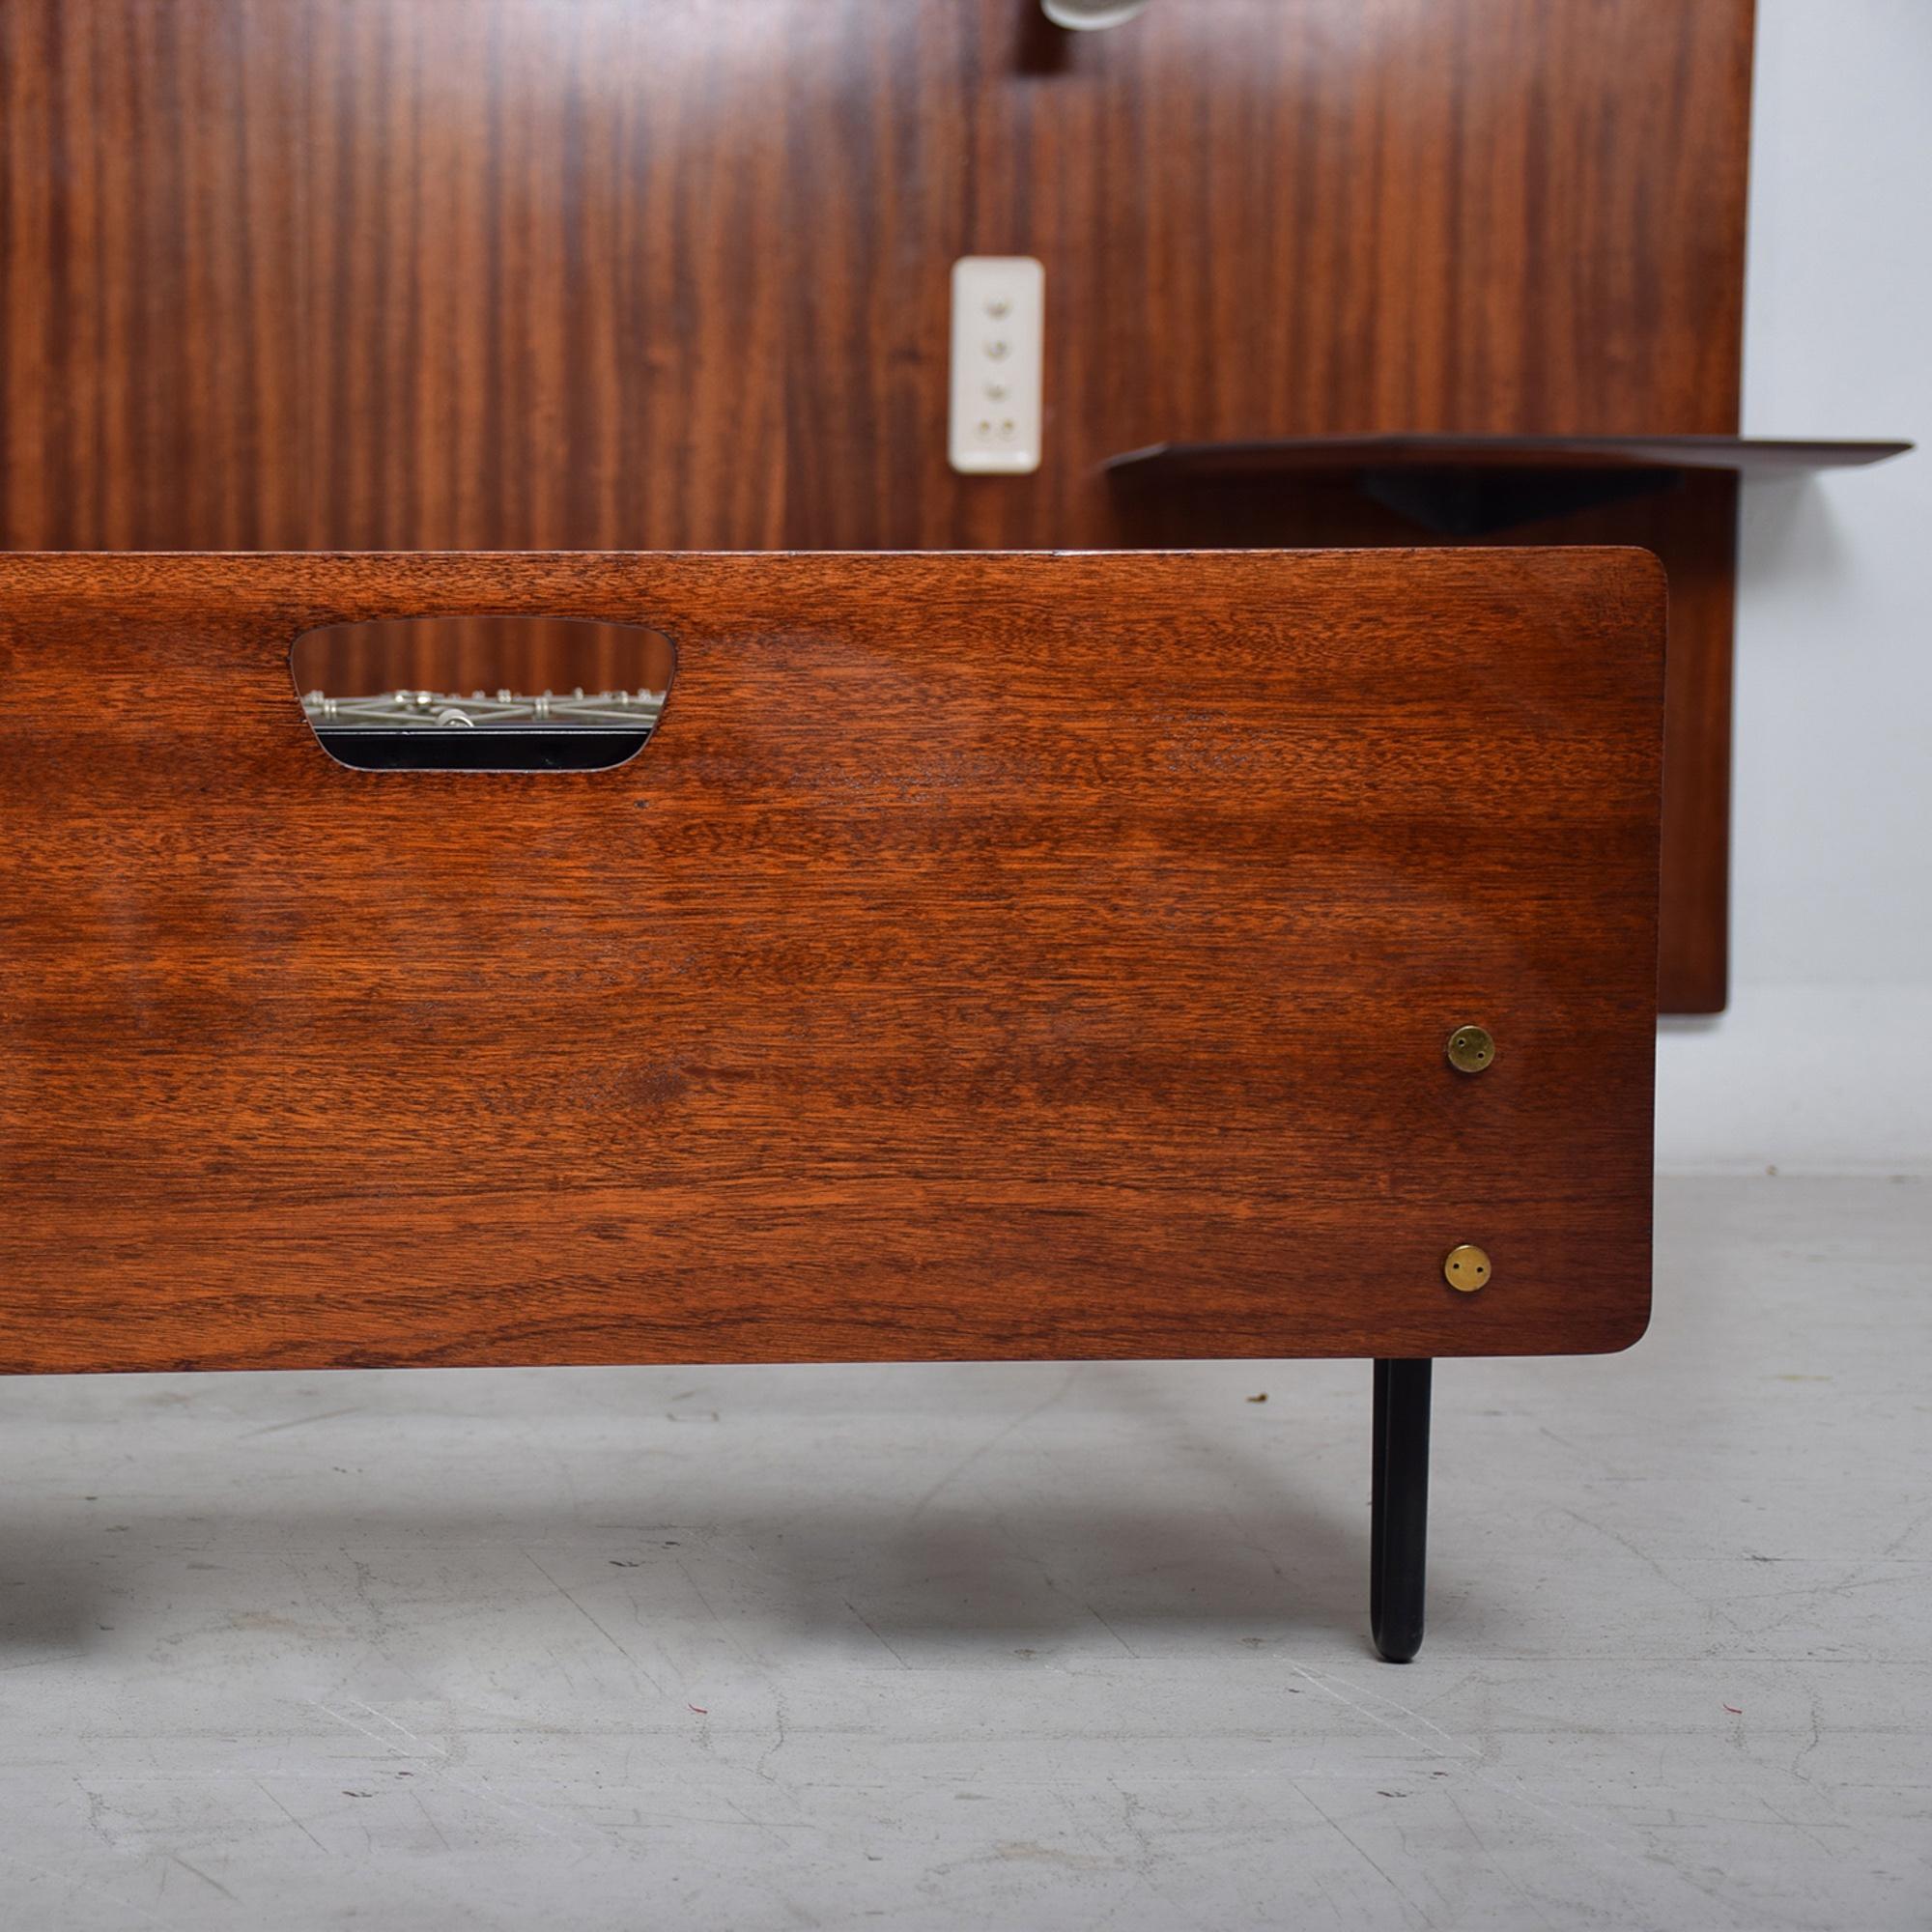 Custom Italian Bed 1950s Milan
Acquired from an apartment in Milan designed by Osvaldo Borsani
Headboard splits two sections attaches to wall.
Three on off buttons at side regulates lights.
Wood is Sapele Mahogany.
Each side has a built-in table;